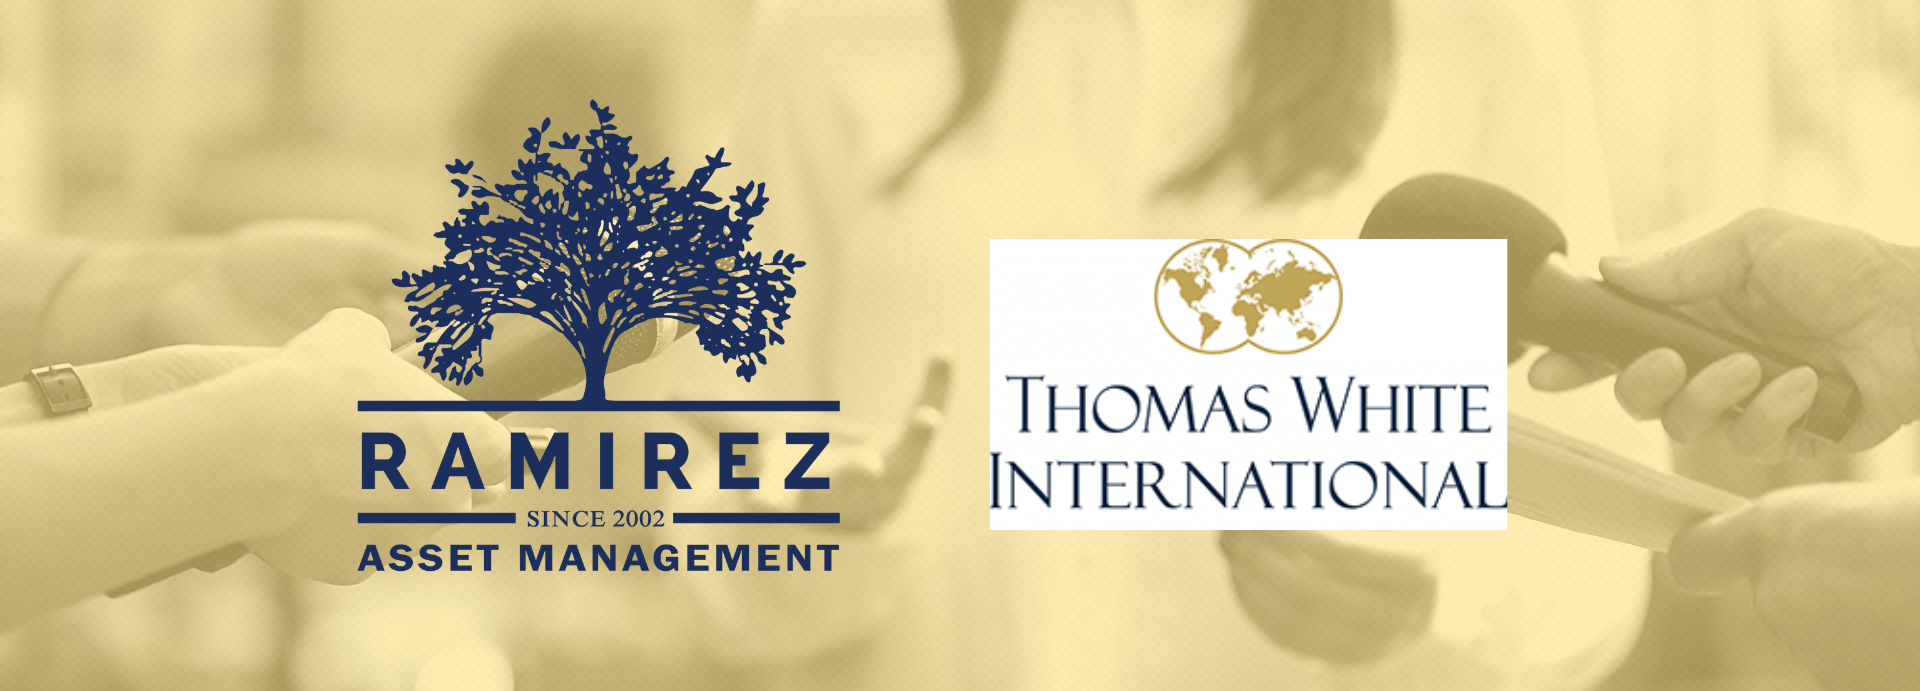 Ramirez Enters Equity Space With Thomas White Acquisition